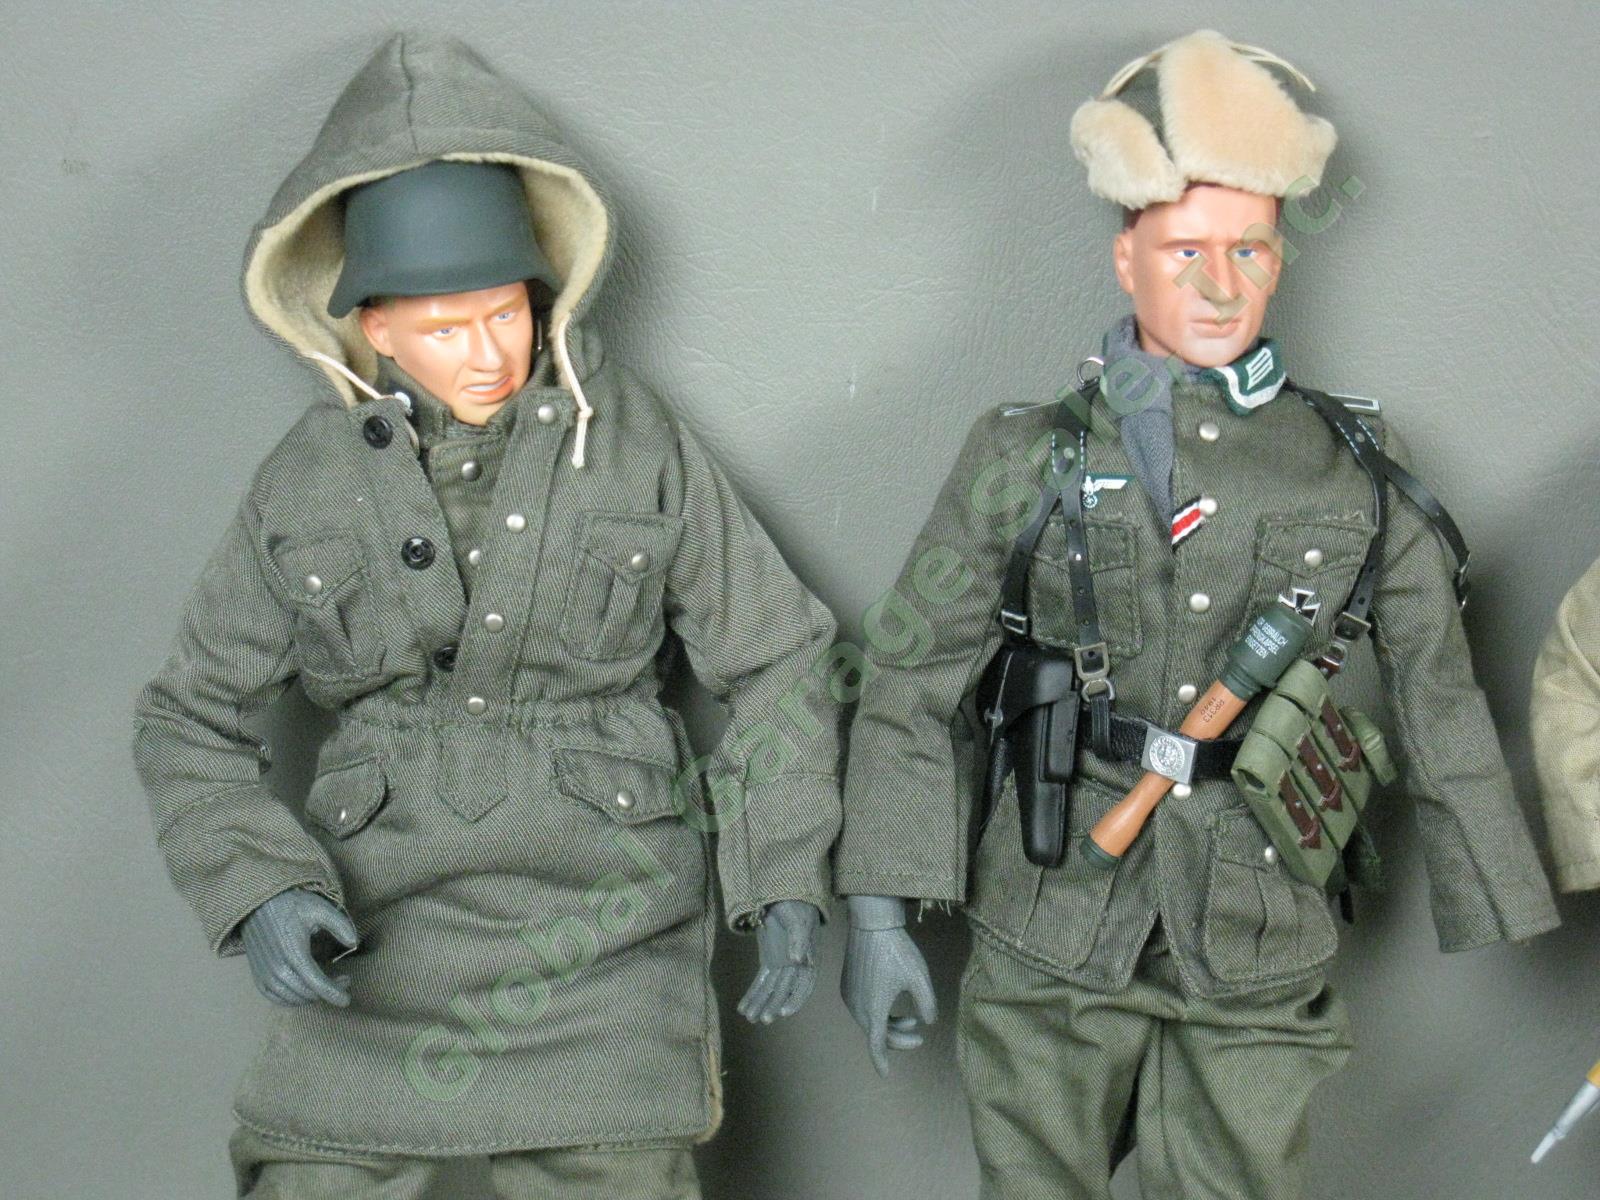 4 Dragon 1/6 Scale 12" WWII German Winter Soldier Figures Lot Skis Snowshoes +NR 1